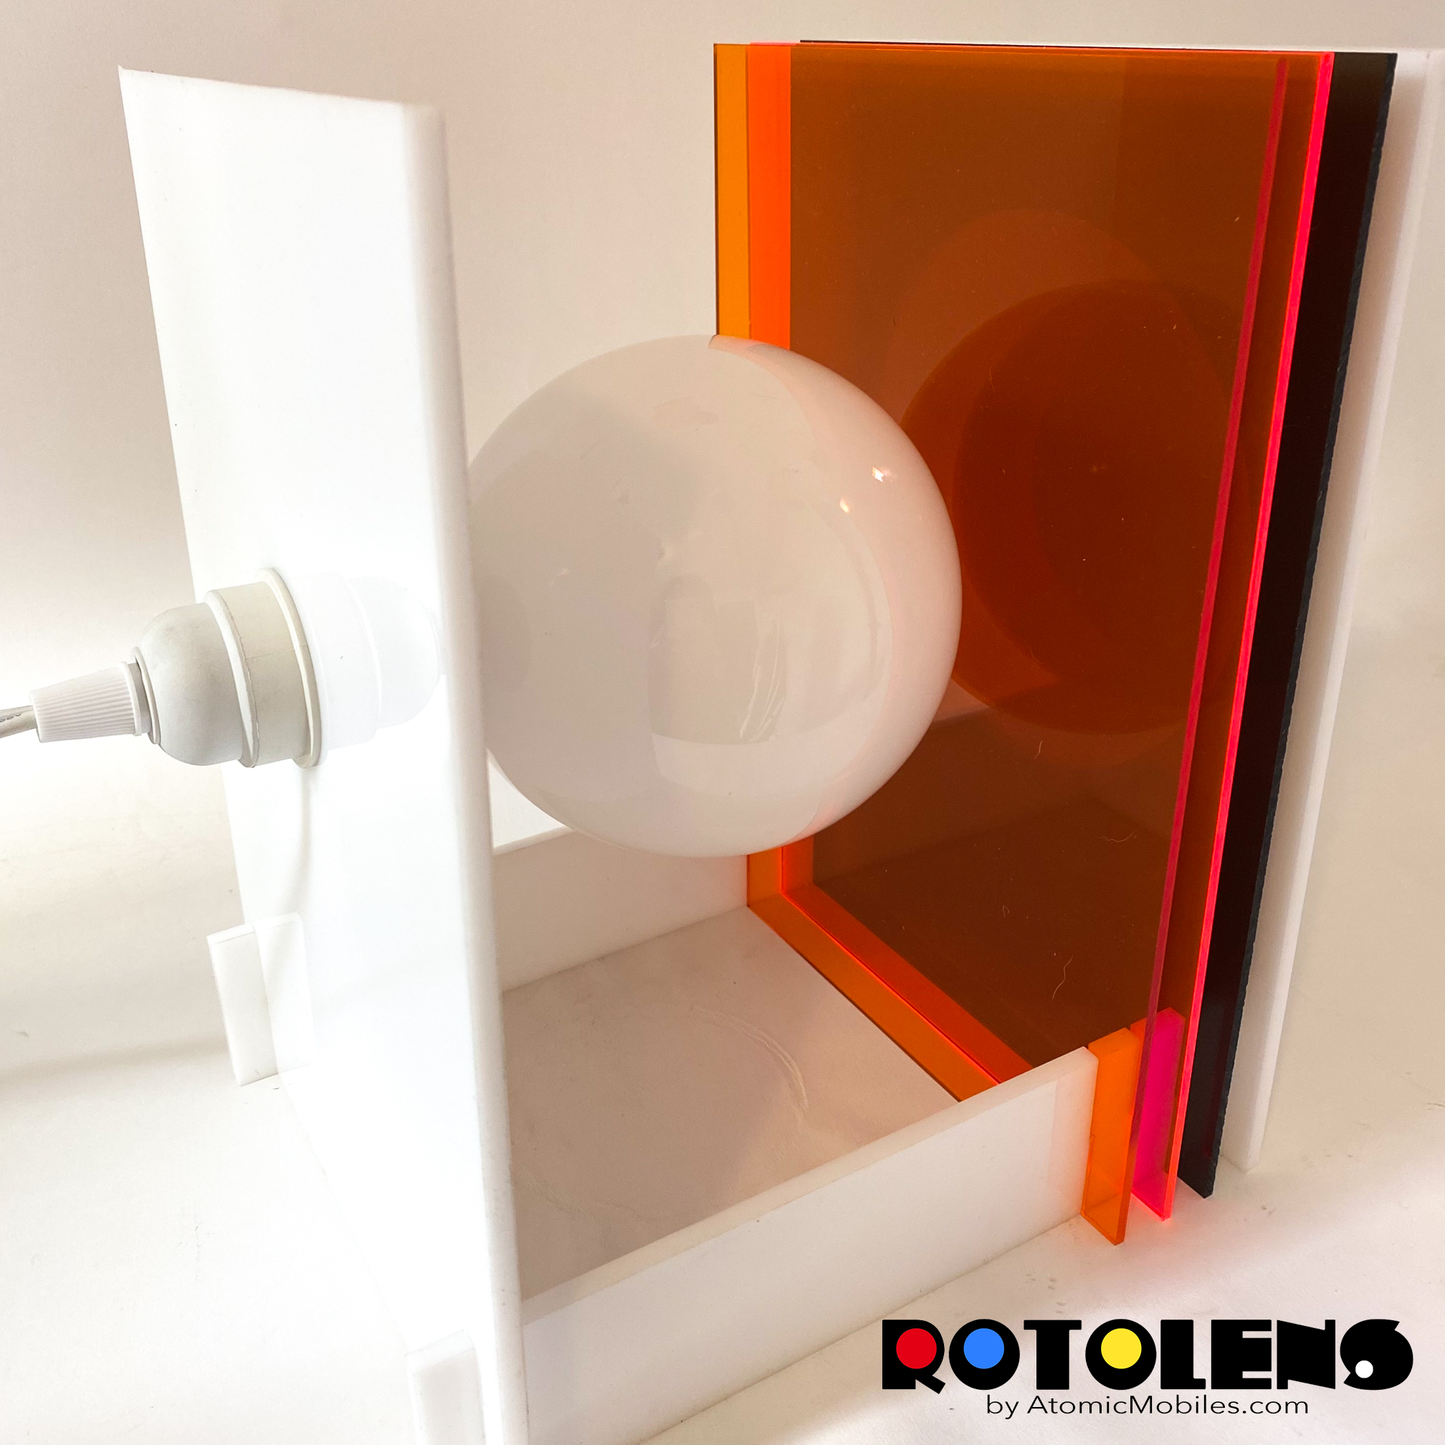 Back view of ROTOLENS Space Age Lamp with interchangeable clear plexiglass lens in Clear Orange, Fluorescent Pink, and Smoky Gray by AtomicMobiles.com